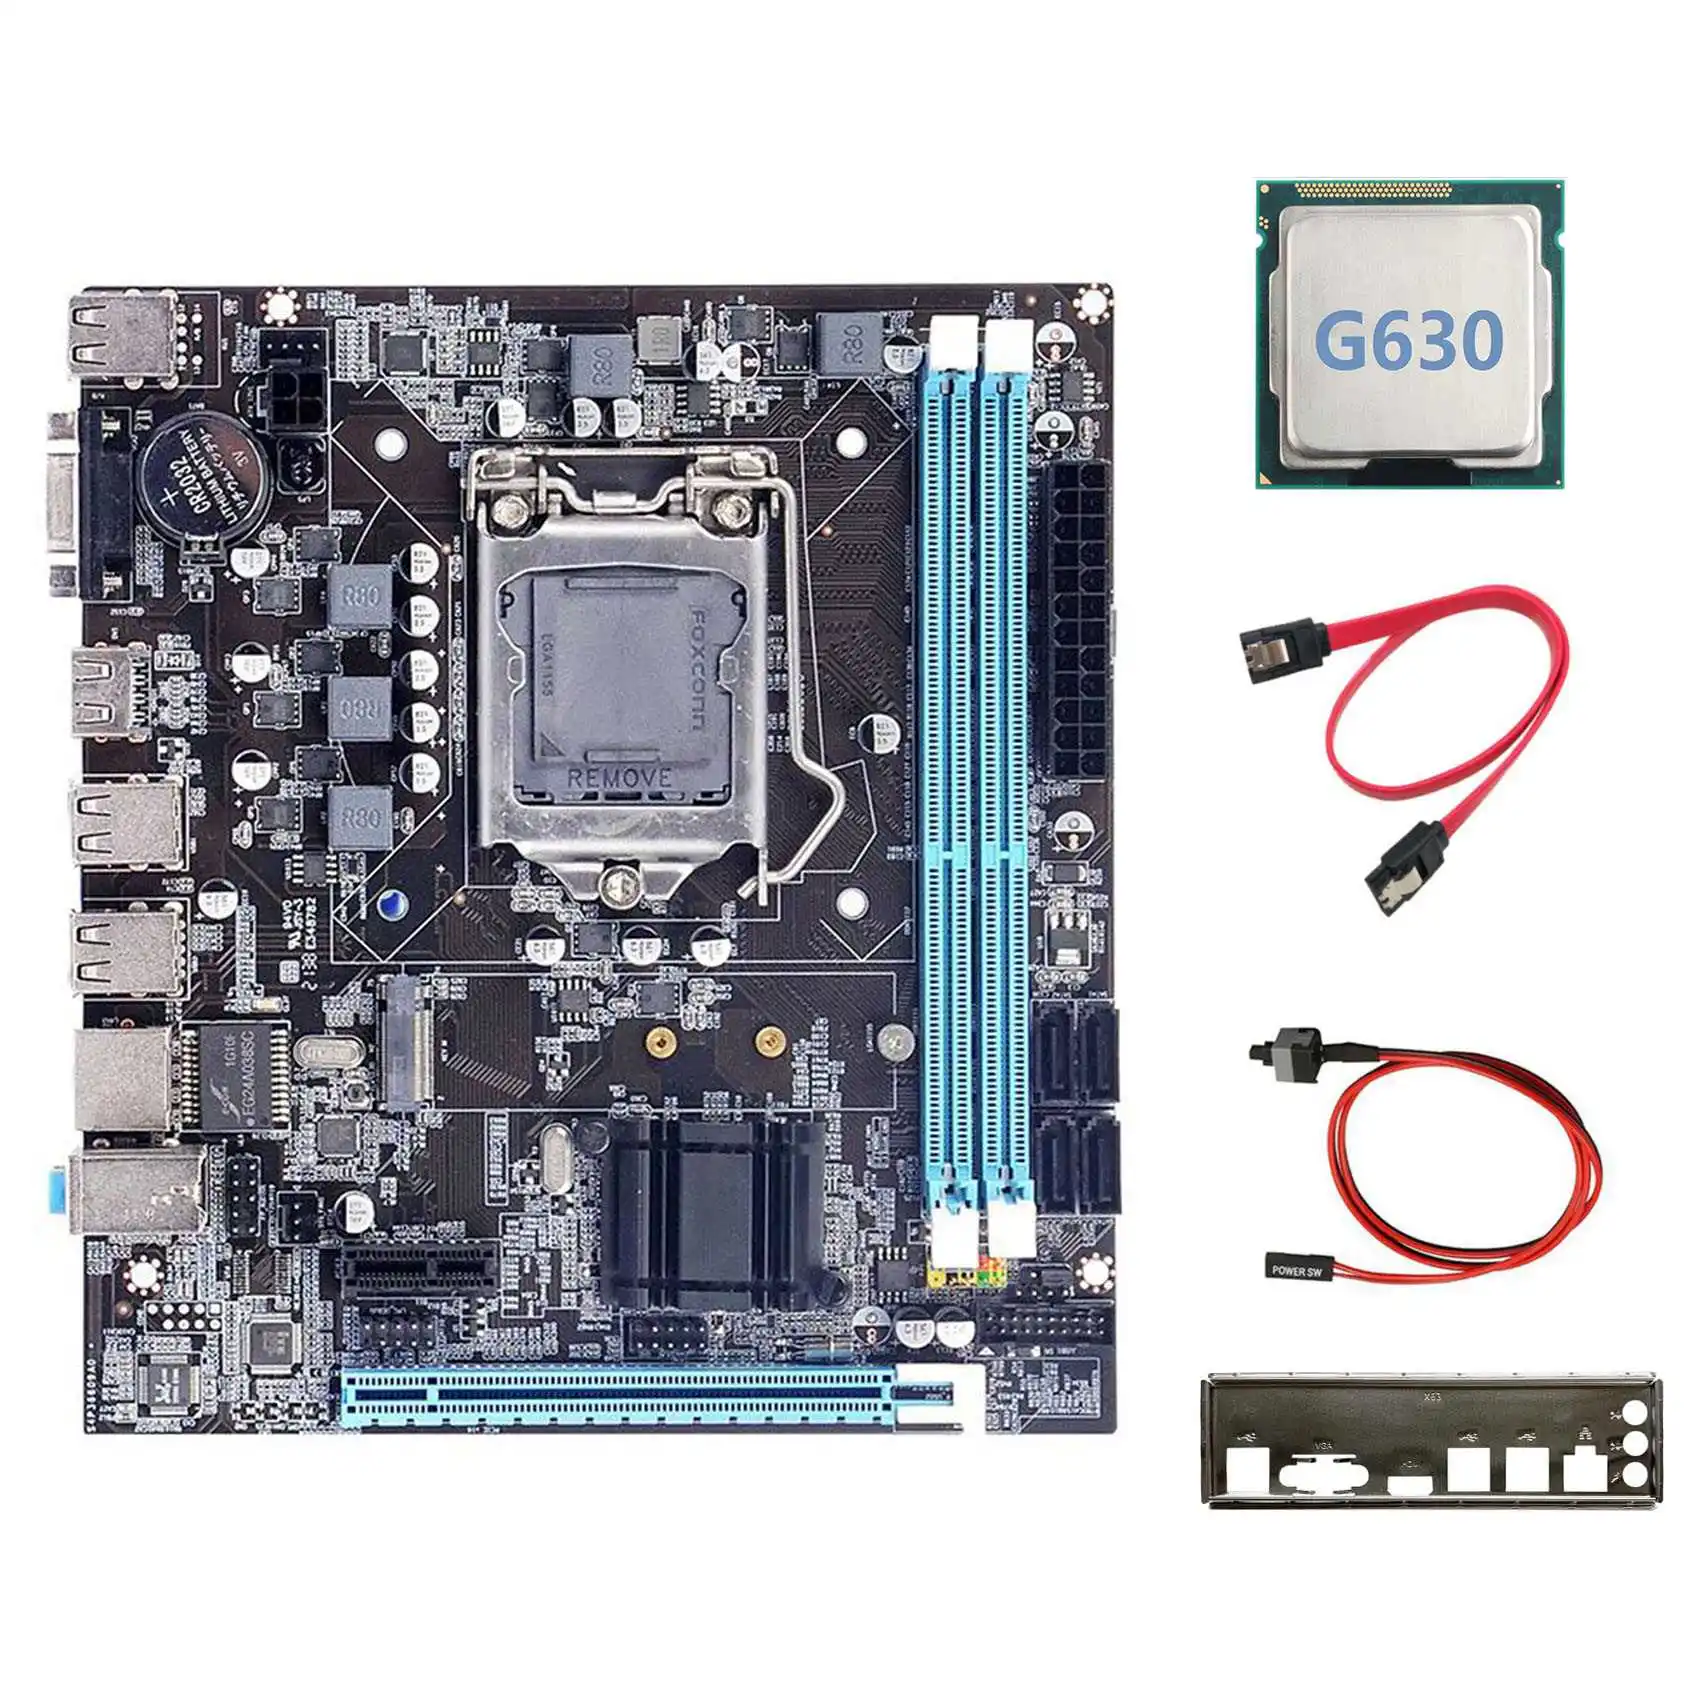 

H61 Motherboard+G630 CPU+SATA Cable+Switch Cable+Baffle LGA1155 M.2 NVME DDR3 for Office for PUBG CF LOL Motherboard